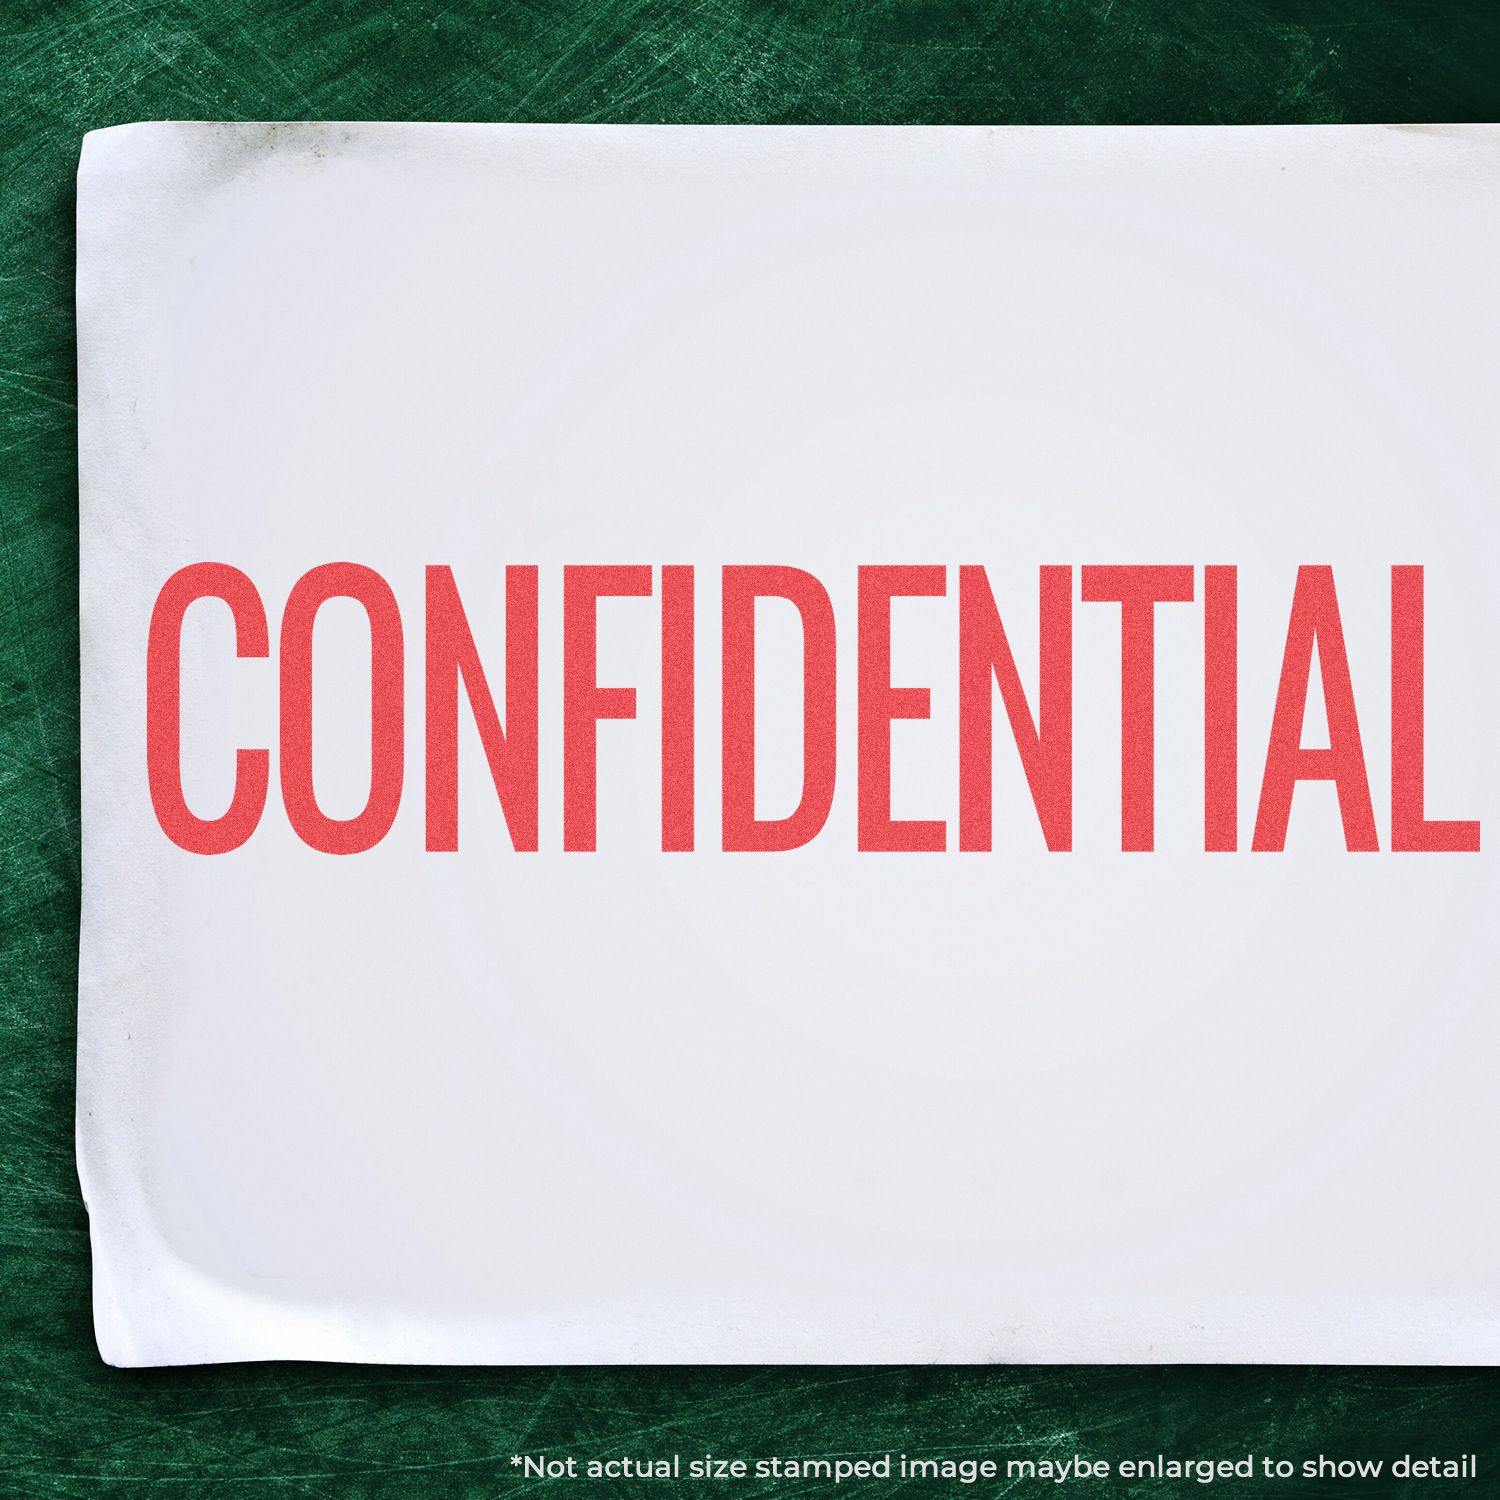 Bold Red Confidential Xstamper Stamp Main Image